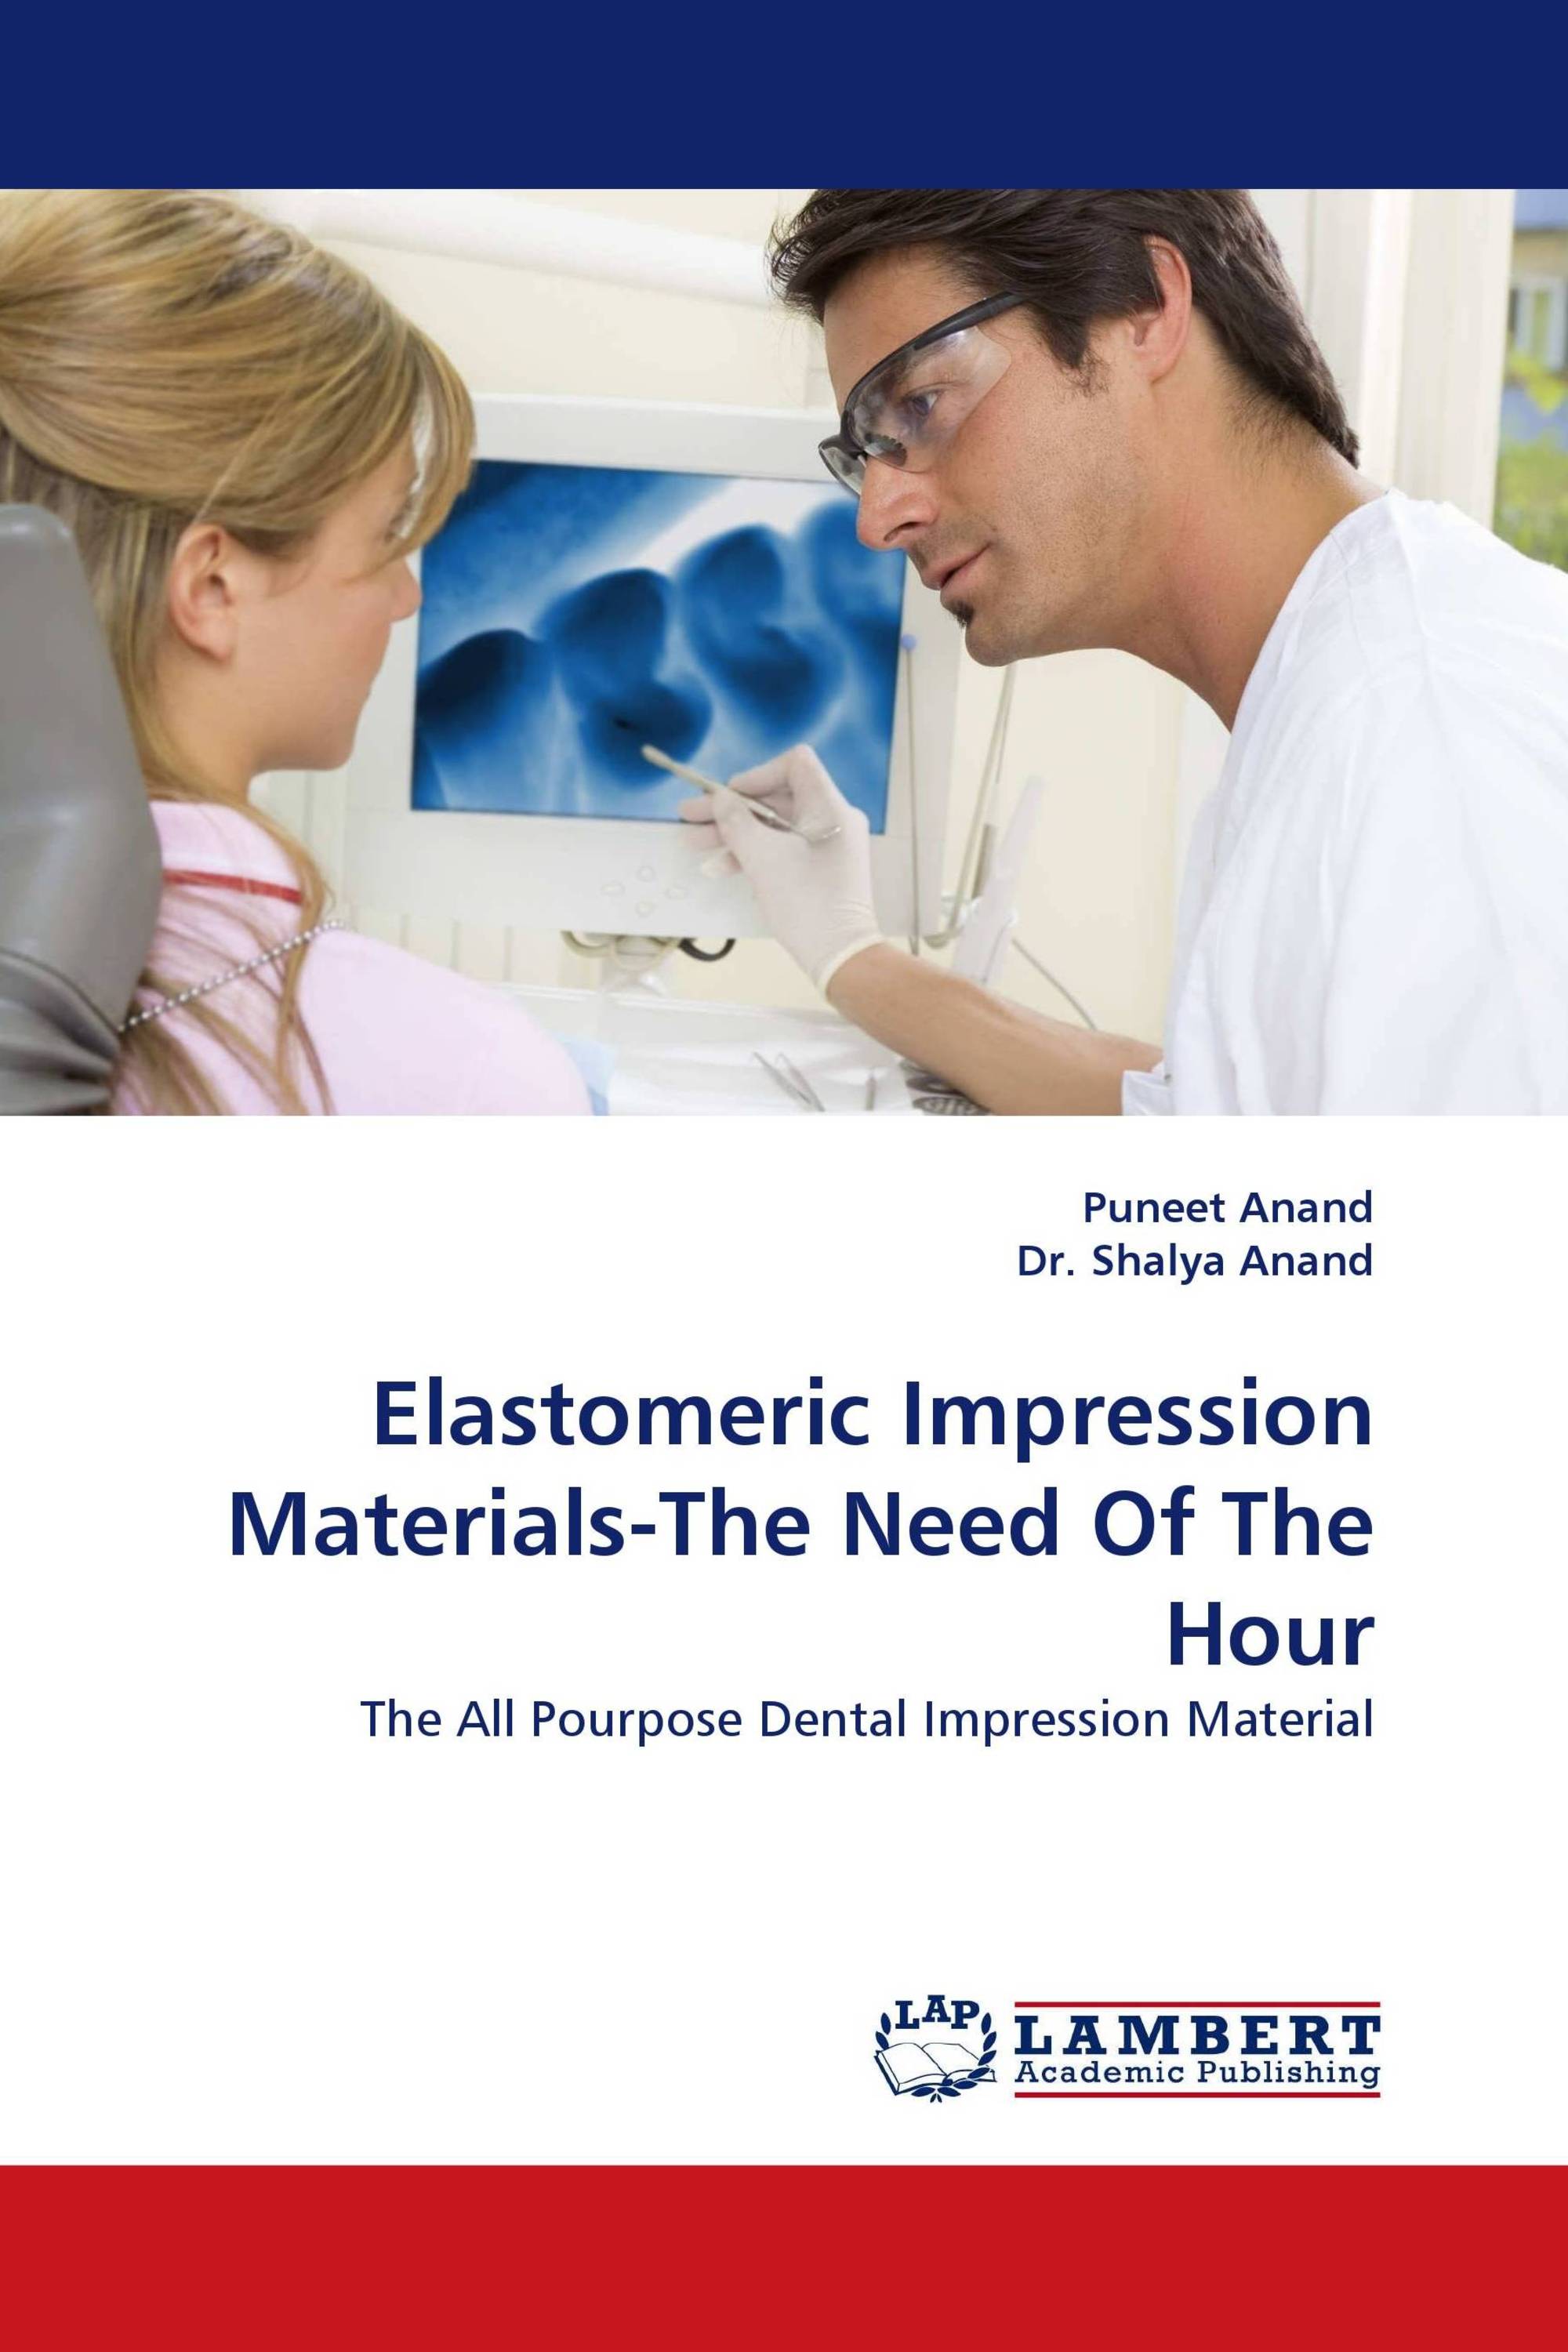 Elastomeric Impression Materials-The Need Of The Hour